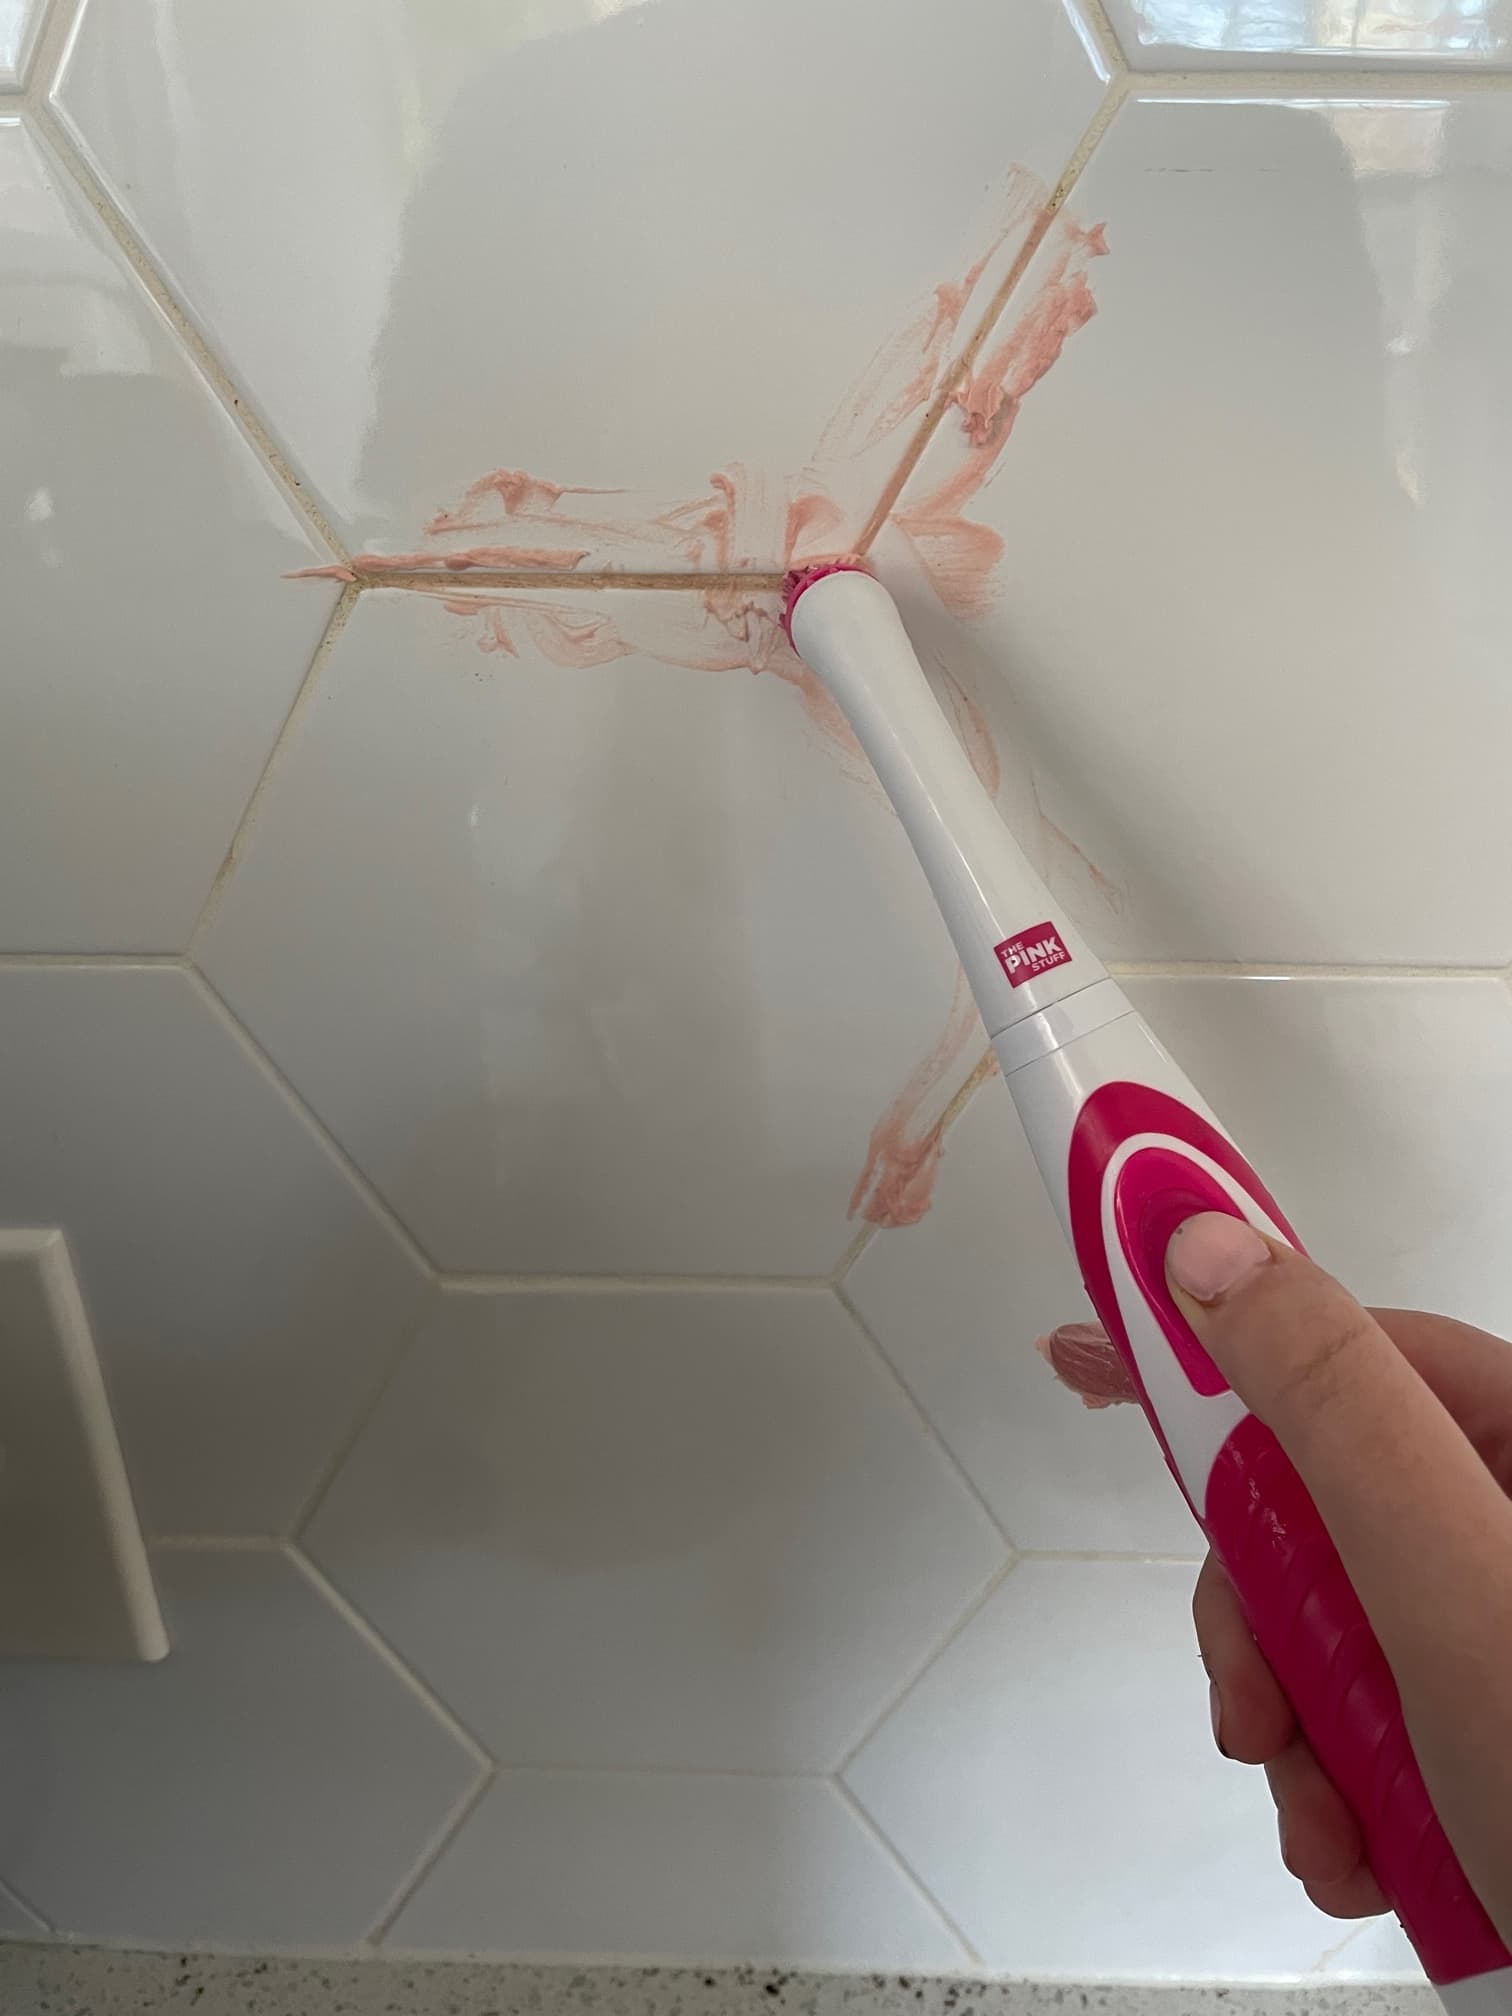 https://cdn.apartmenttherapy.info/image/upload/v1648500165/k/Edit/2022-04-Pink-Stuff-Grout-Cleaner-Review/IMG_0433.jpg